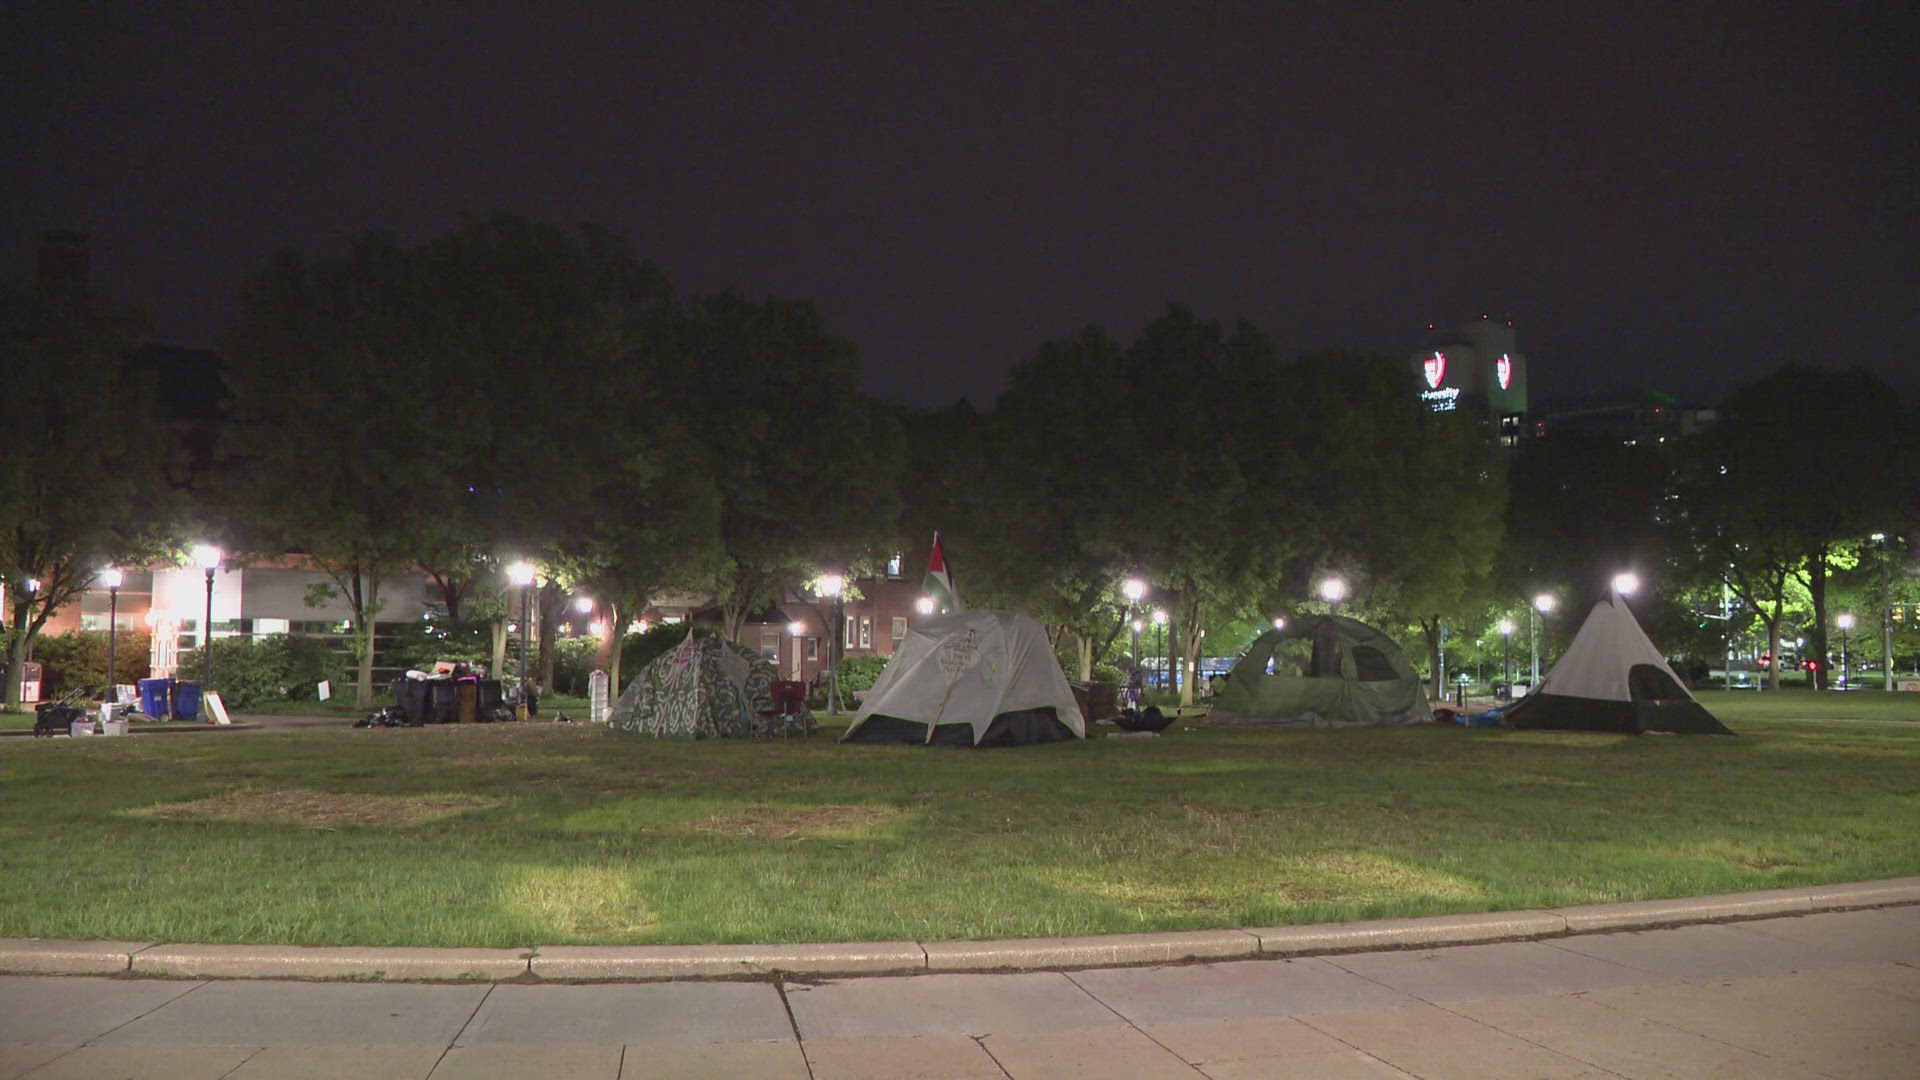 3News has confirmed organizers have decided to take the encampment down with the spring semester ending this week, though they vowed their protests would continue.